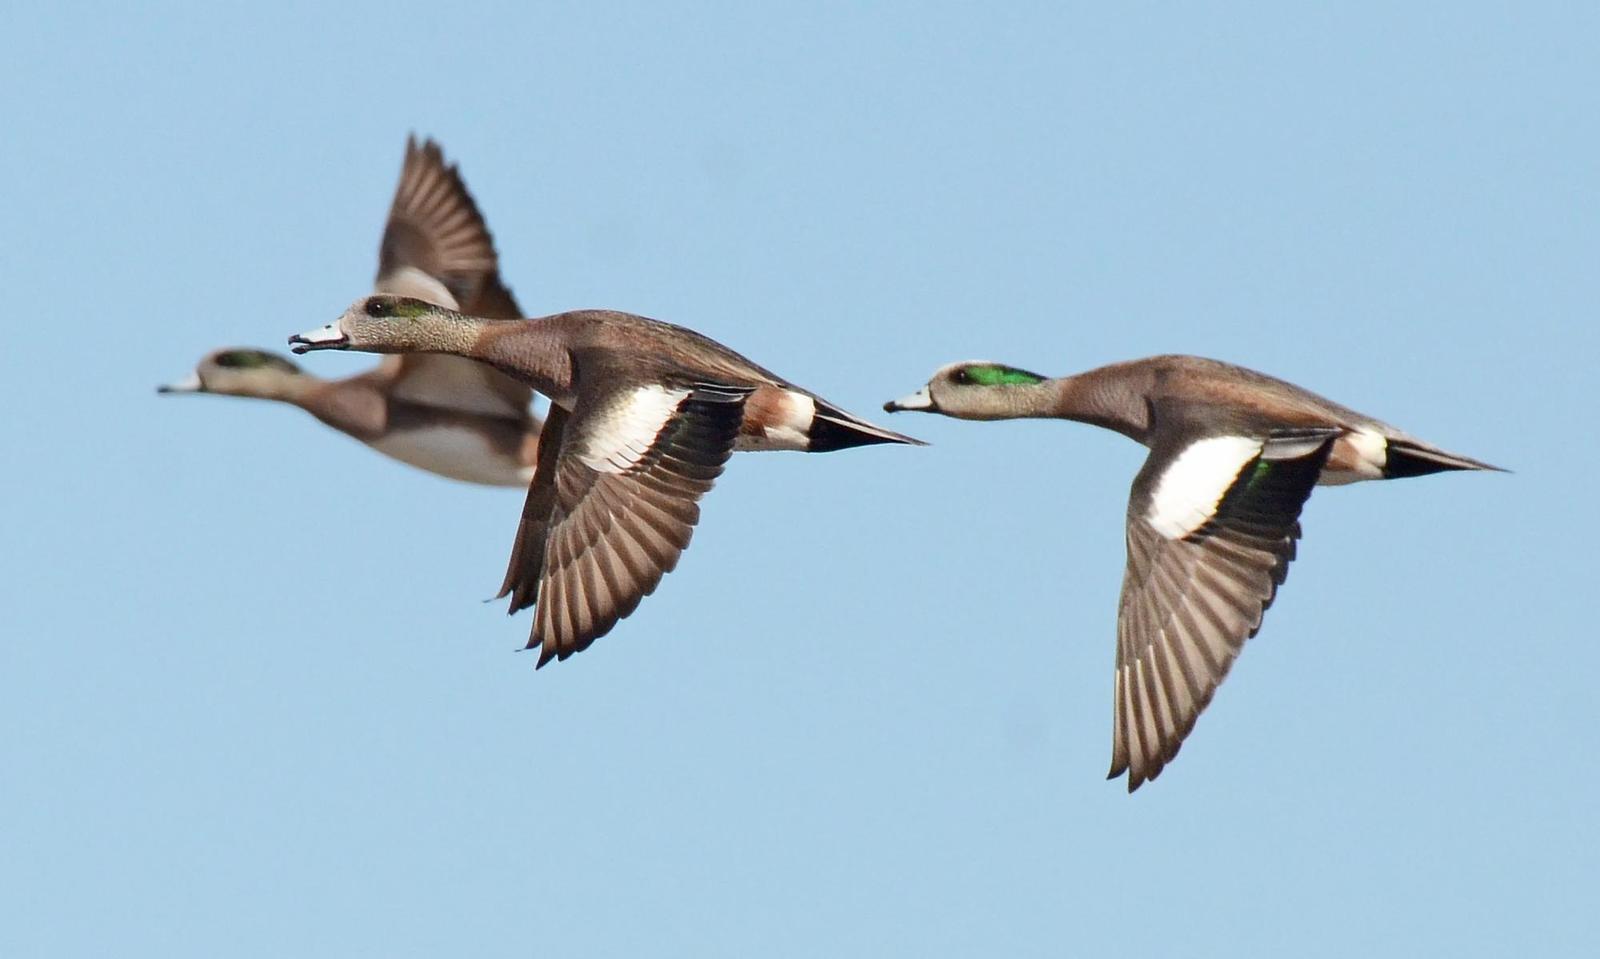 American Wigeon Photo by Steven Mlodinow